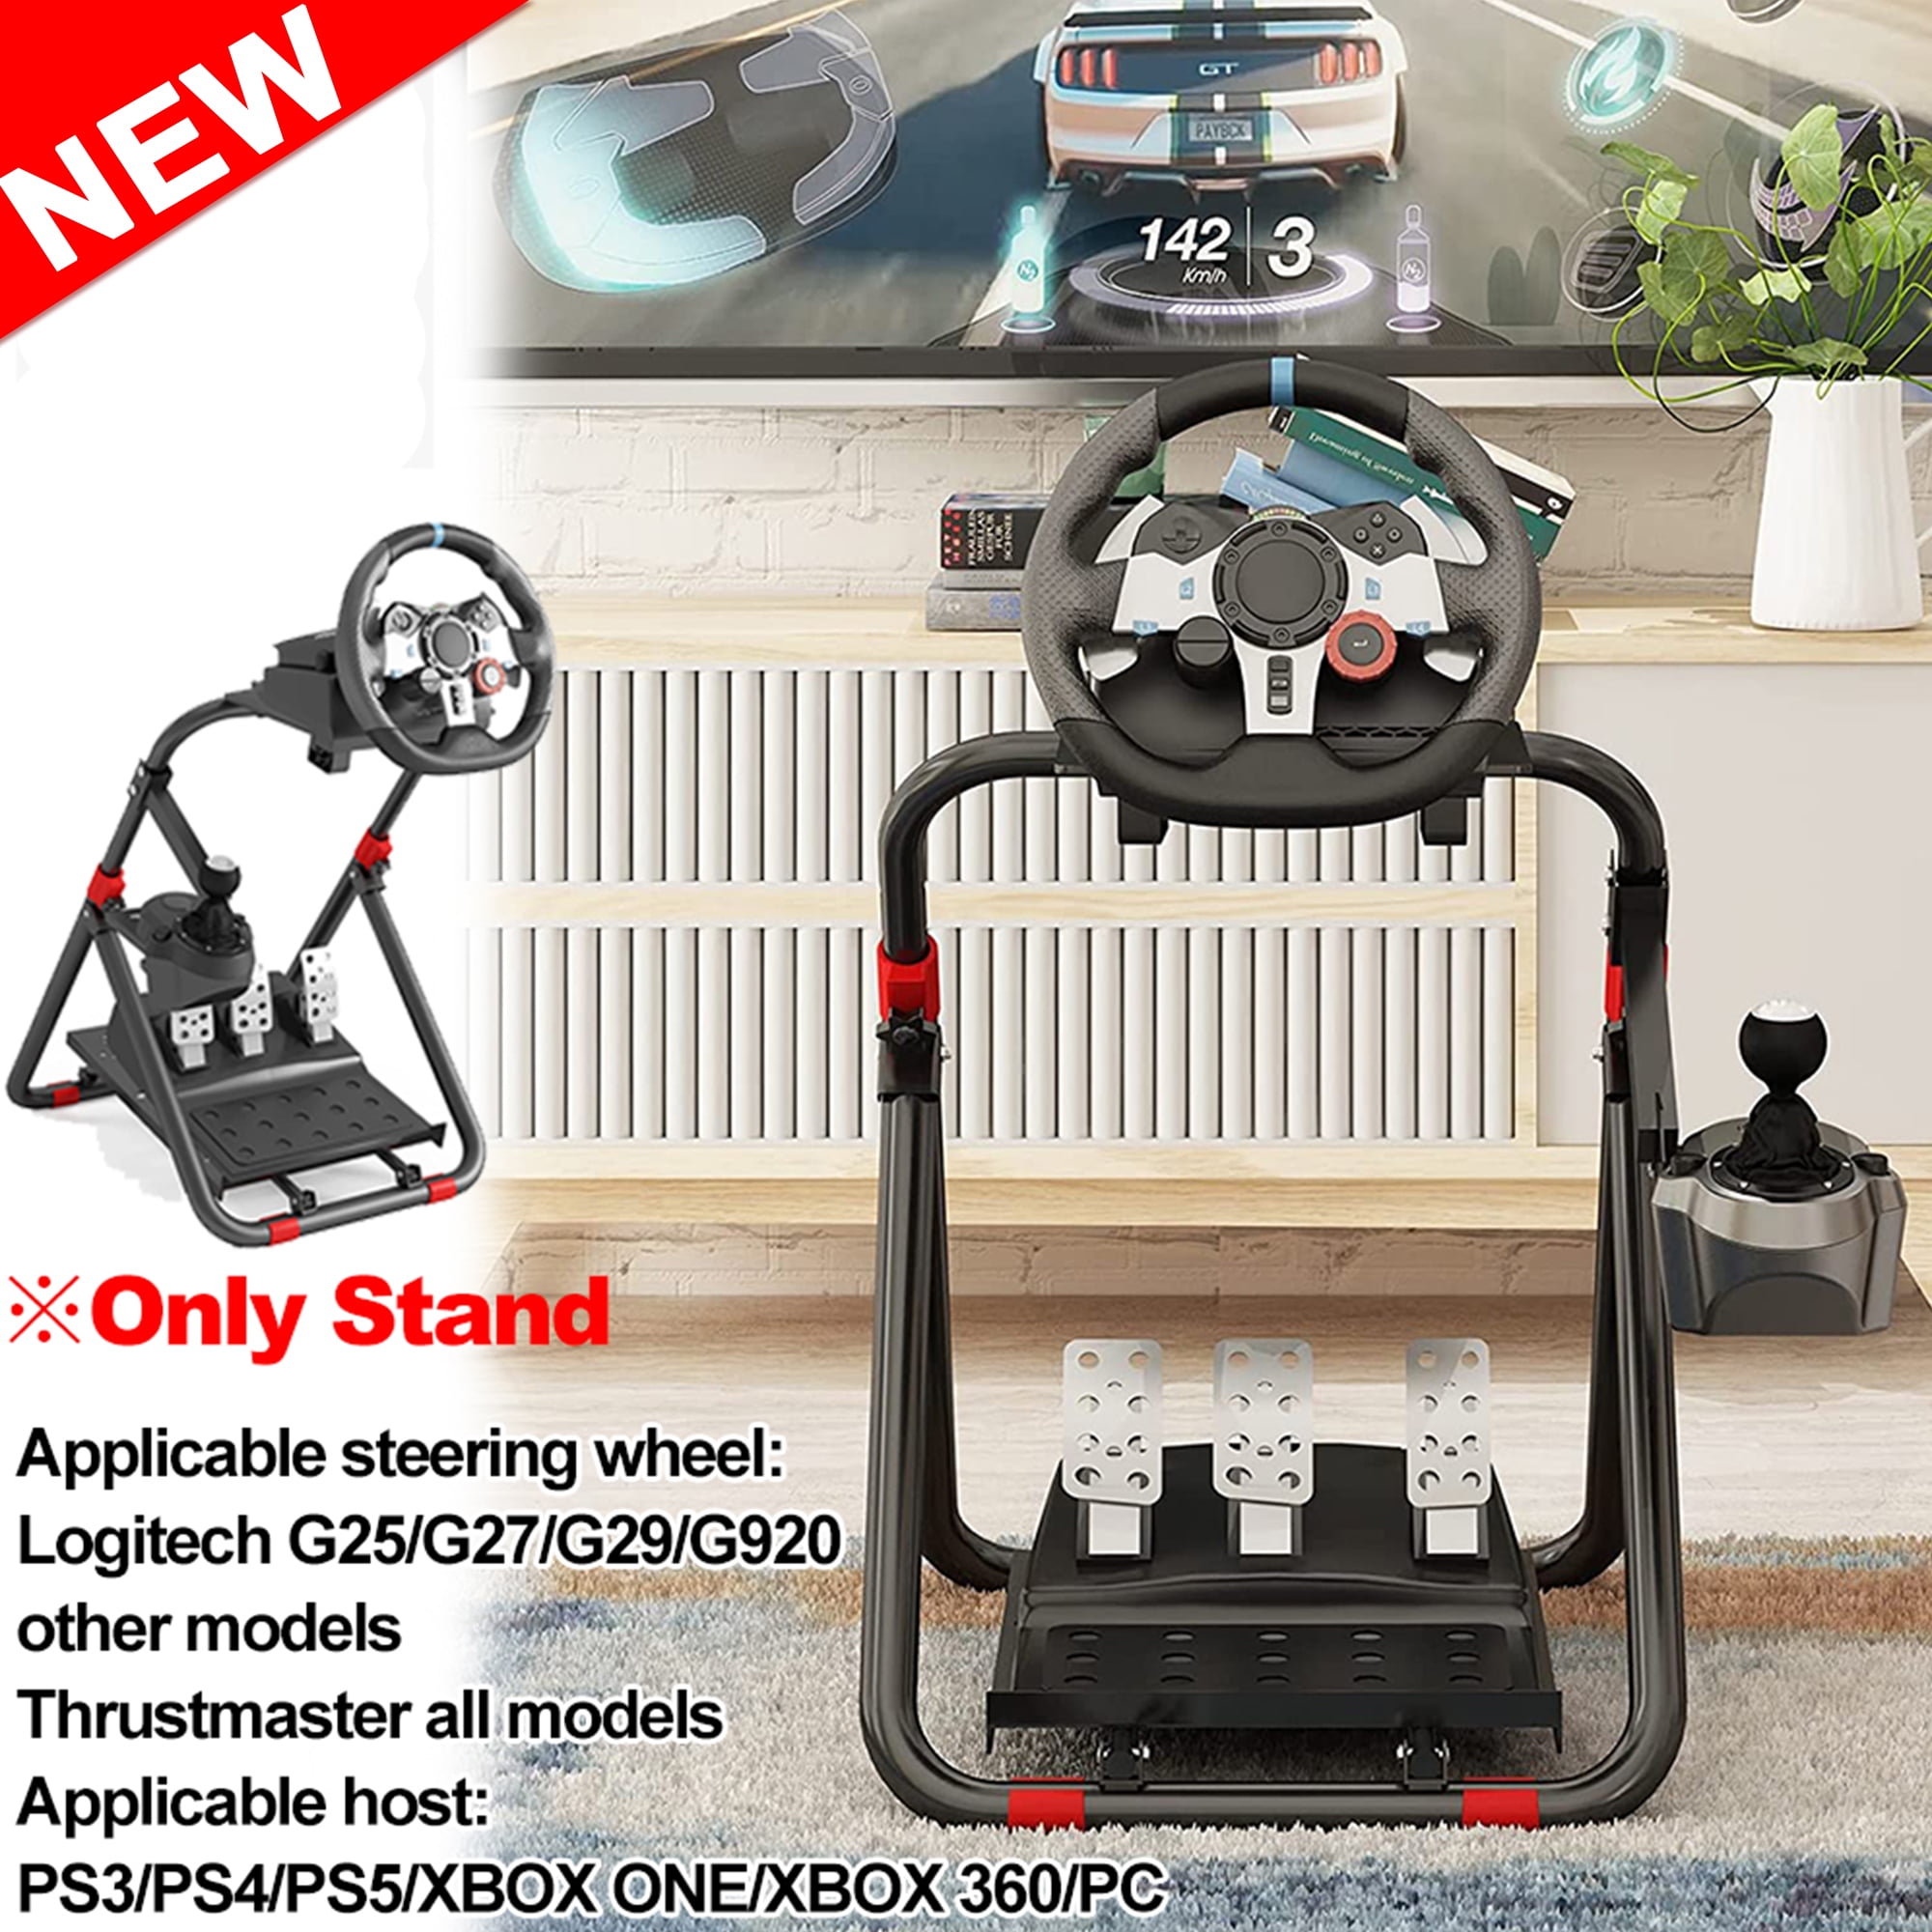 dat is alles boot coupon Racing Steering Wheel Stand Collapsible Tilt-Adjustable Racing Stand for  Logitech G25 G27 G29 G920 / Thrustmaster T248X T248 T300 T150 458 TX Xbox 1  PS4 PS5 PC - Walmart.com